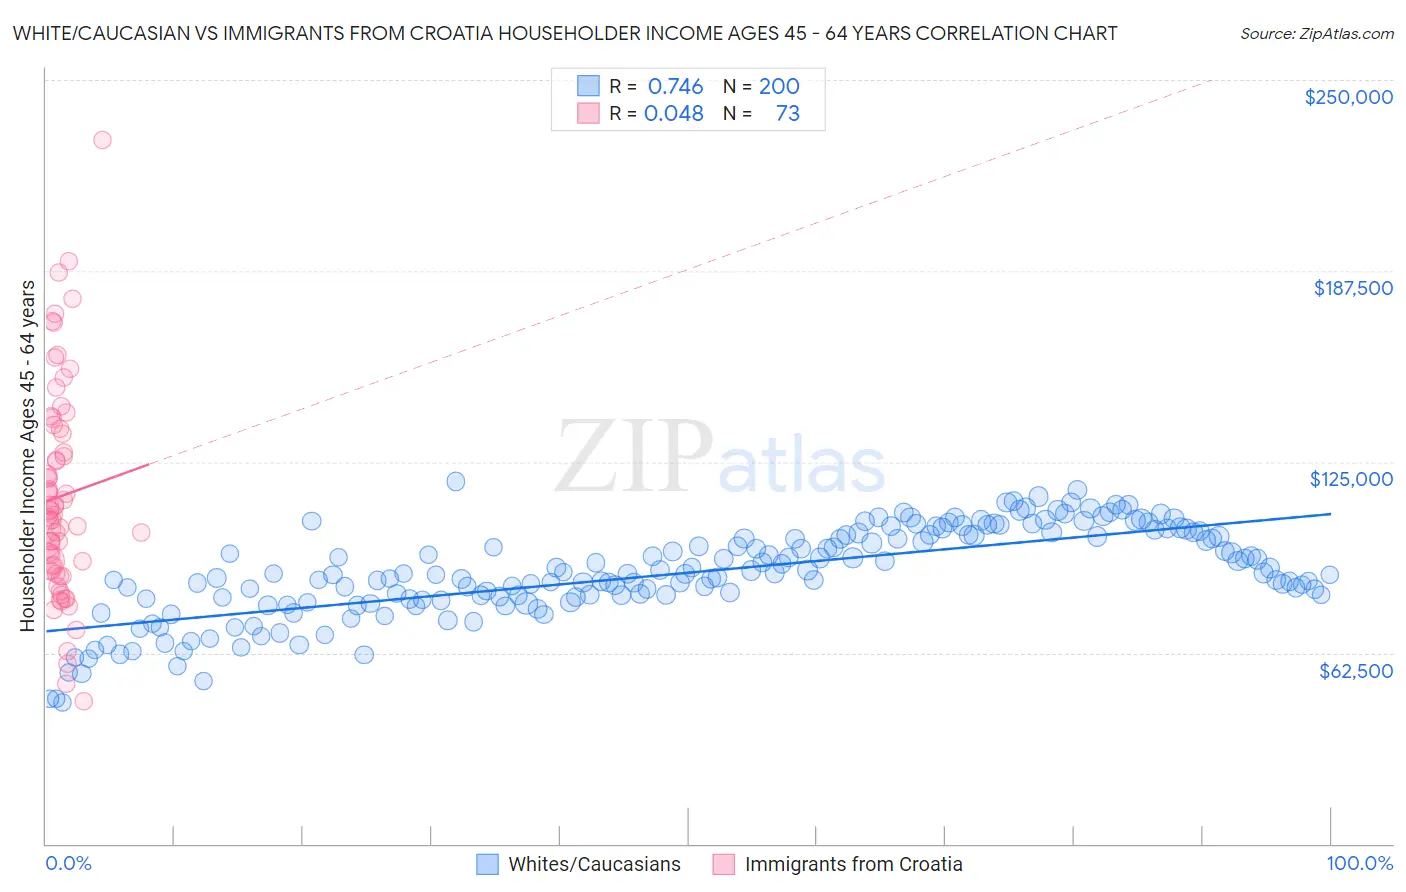 White/Caucasian vs Immigrants from Croatia Householder Income Ages 45 - 64 years